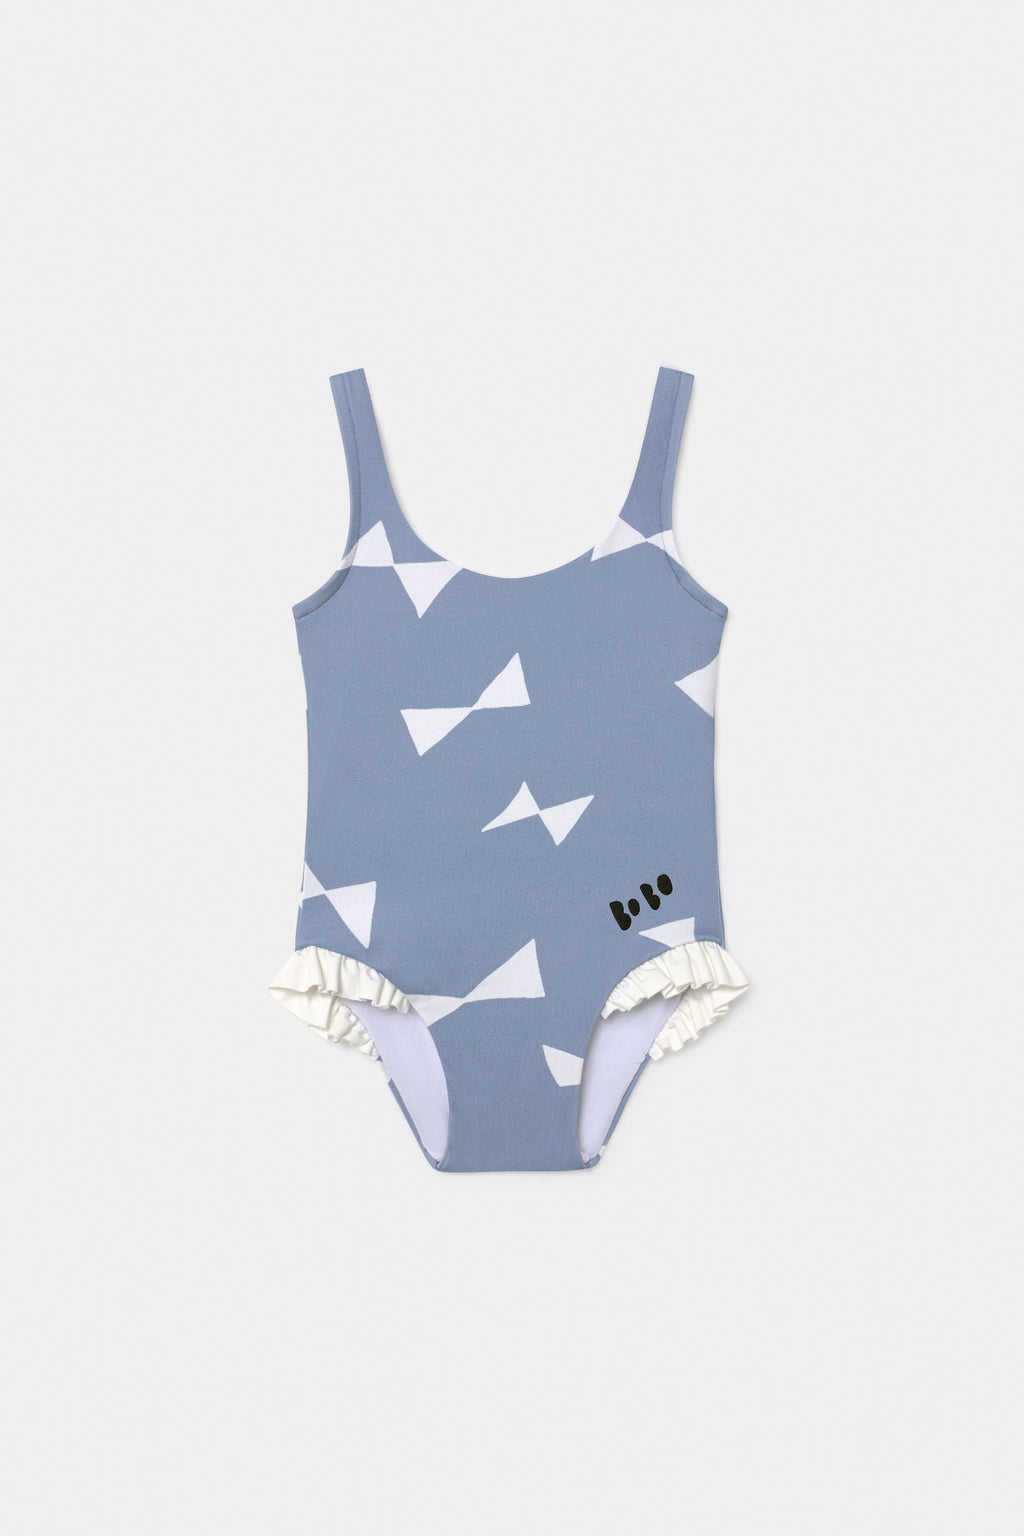 Bobo Choses All Over Bow Baby Swimsuit